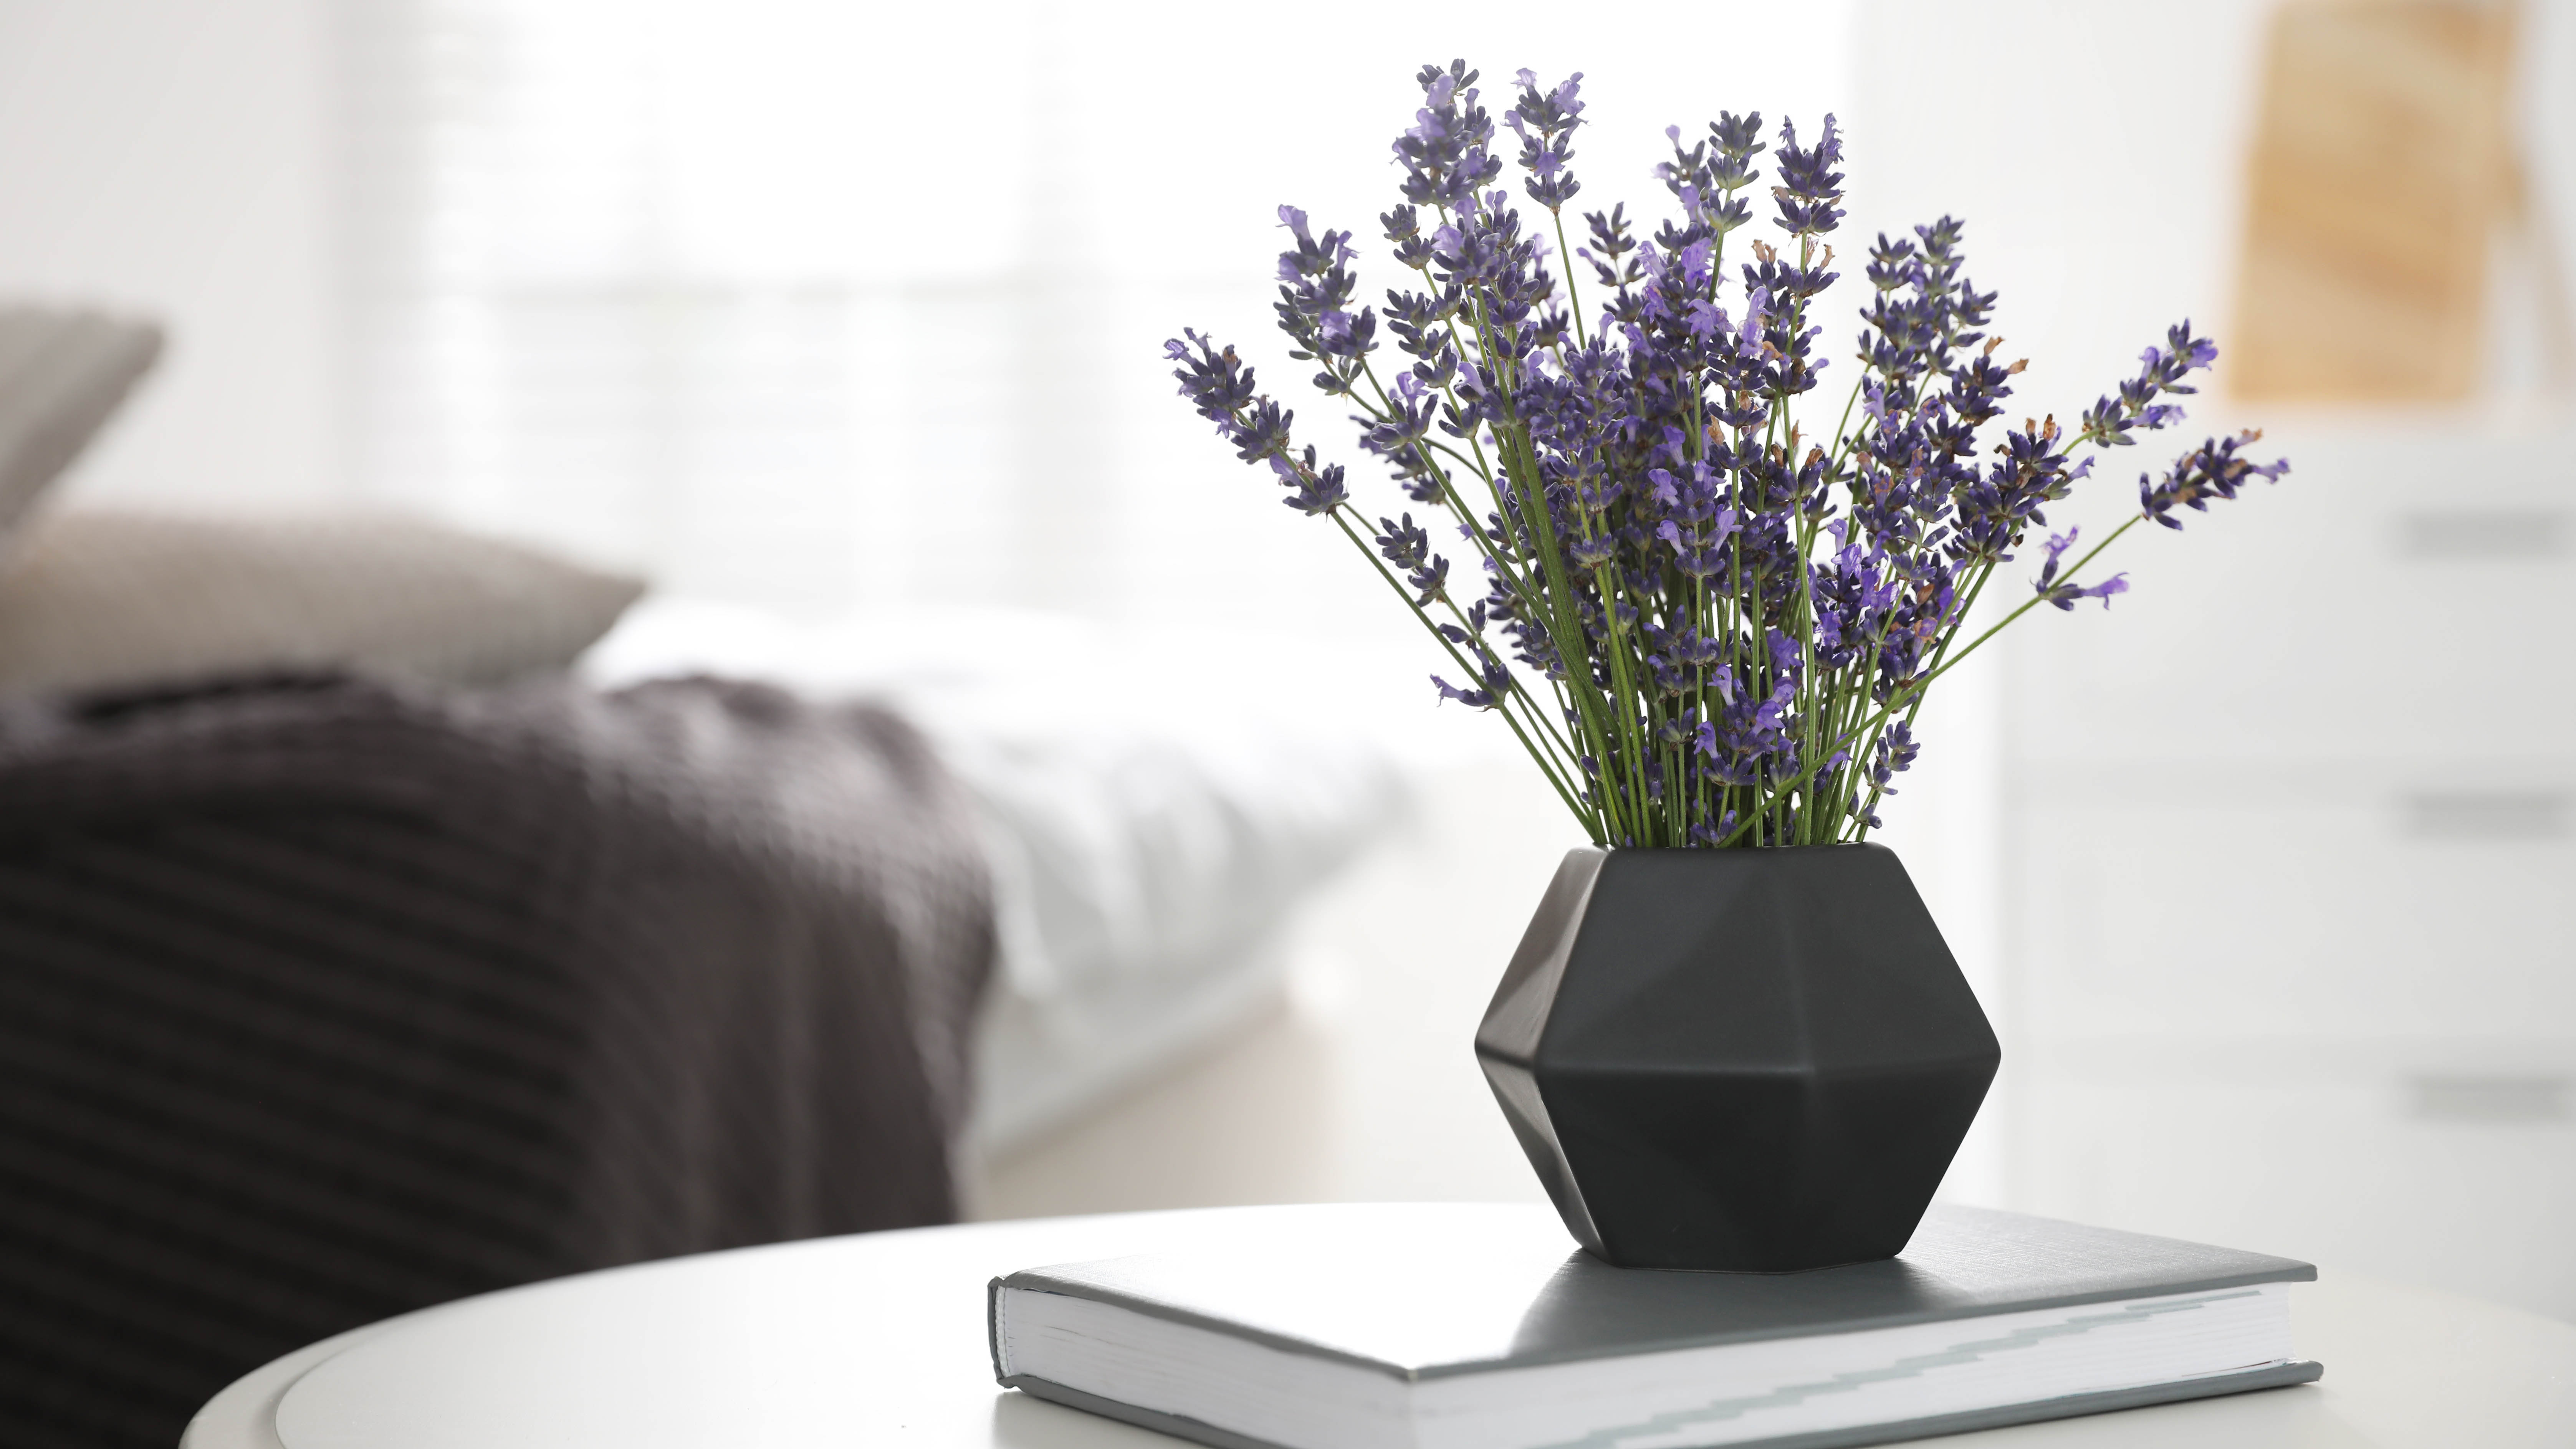 Vase full of lavender on a book on a table